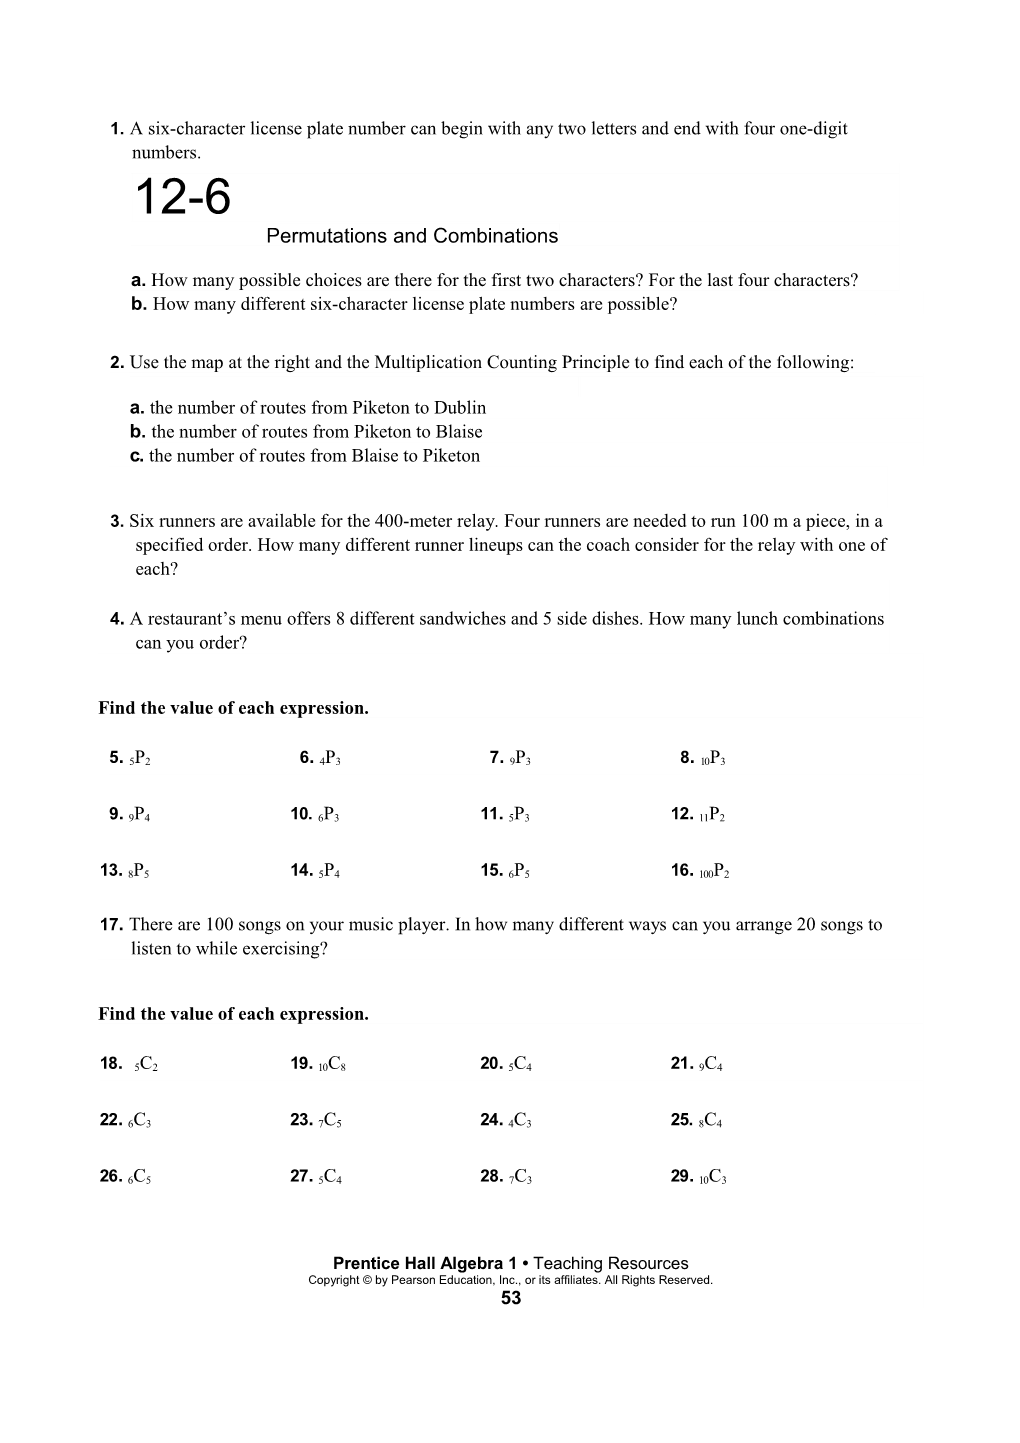 Permutations and Combinations s1